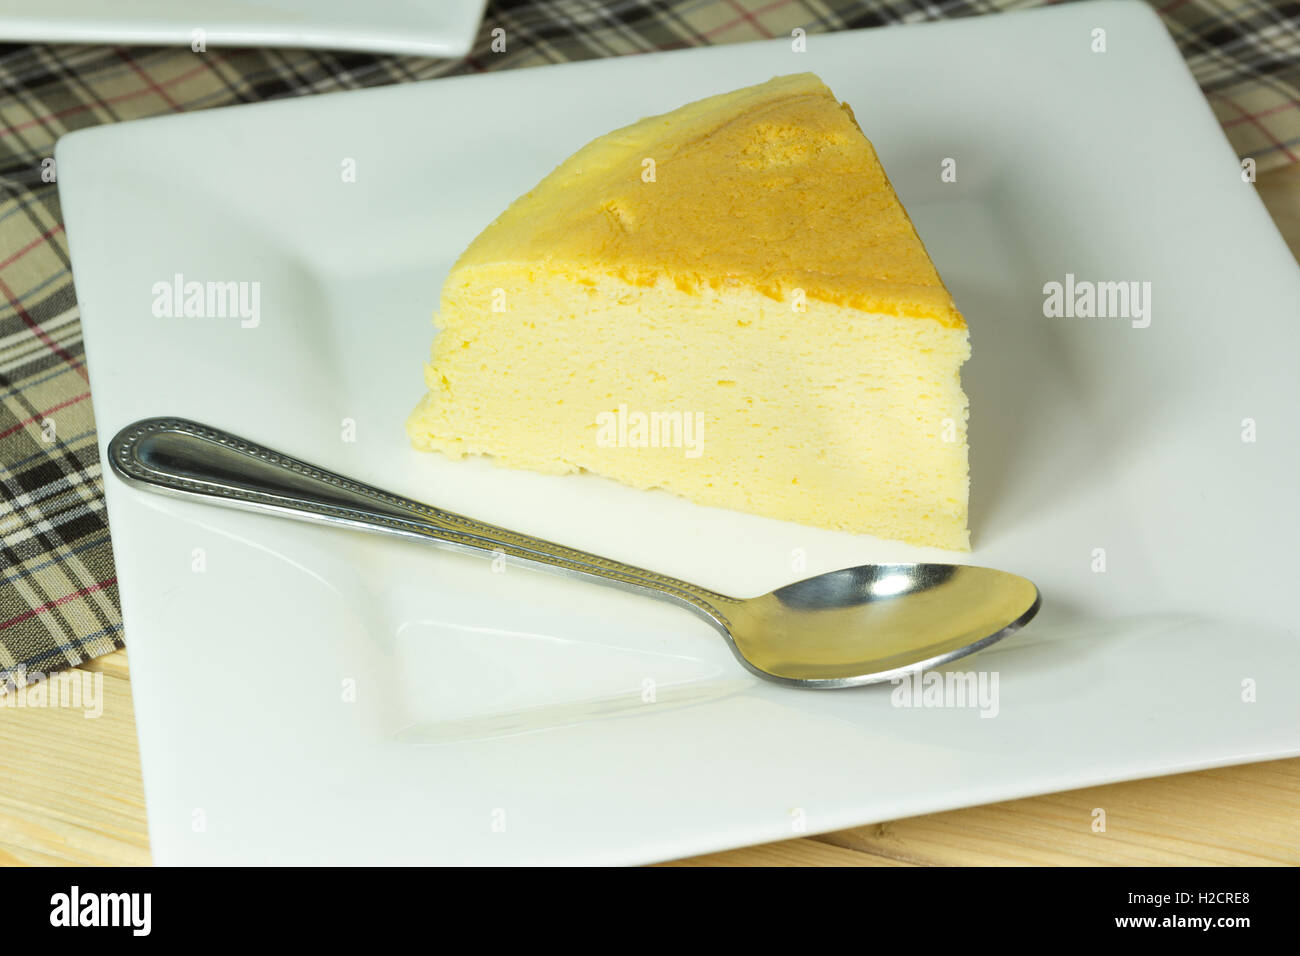 Cheesecake coton on white plate Banque D'Images